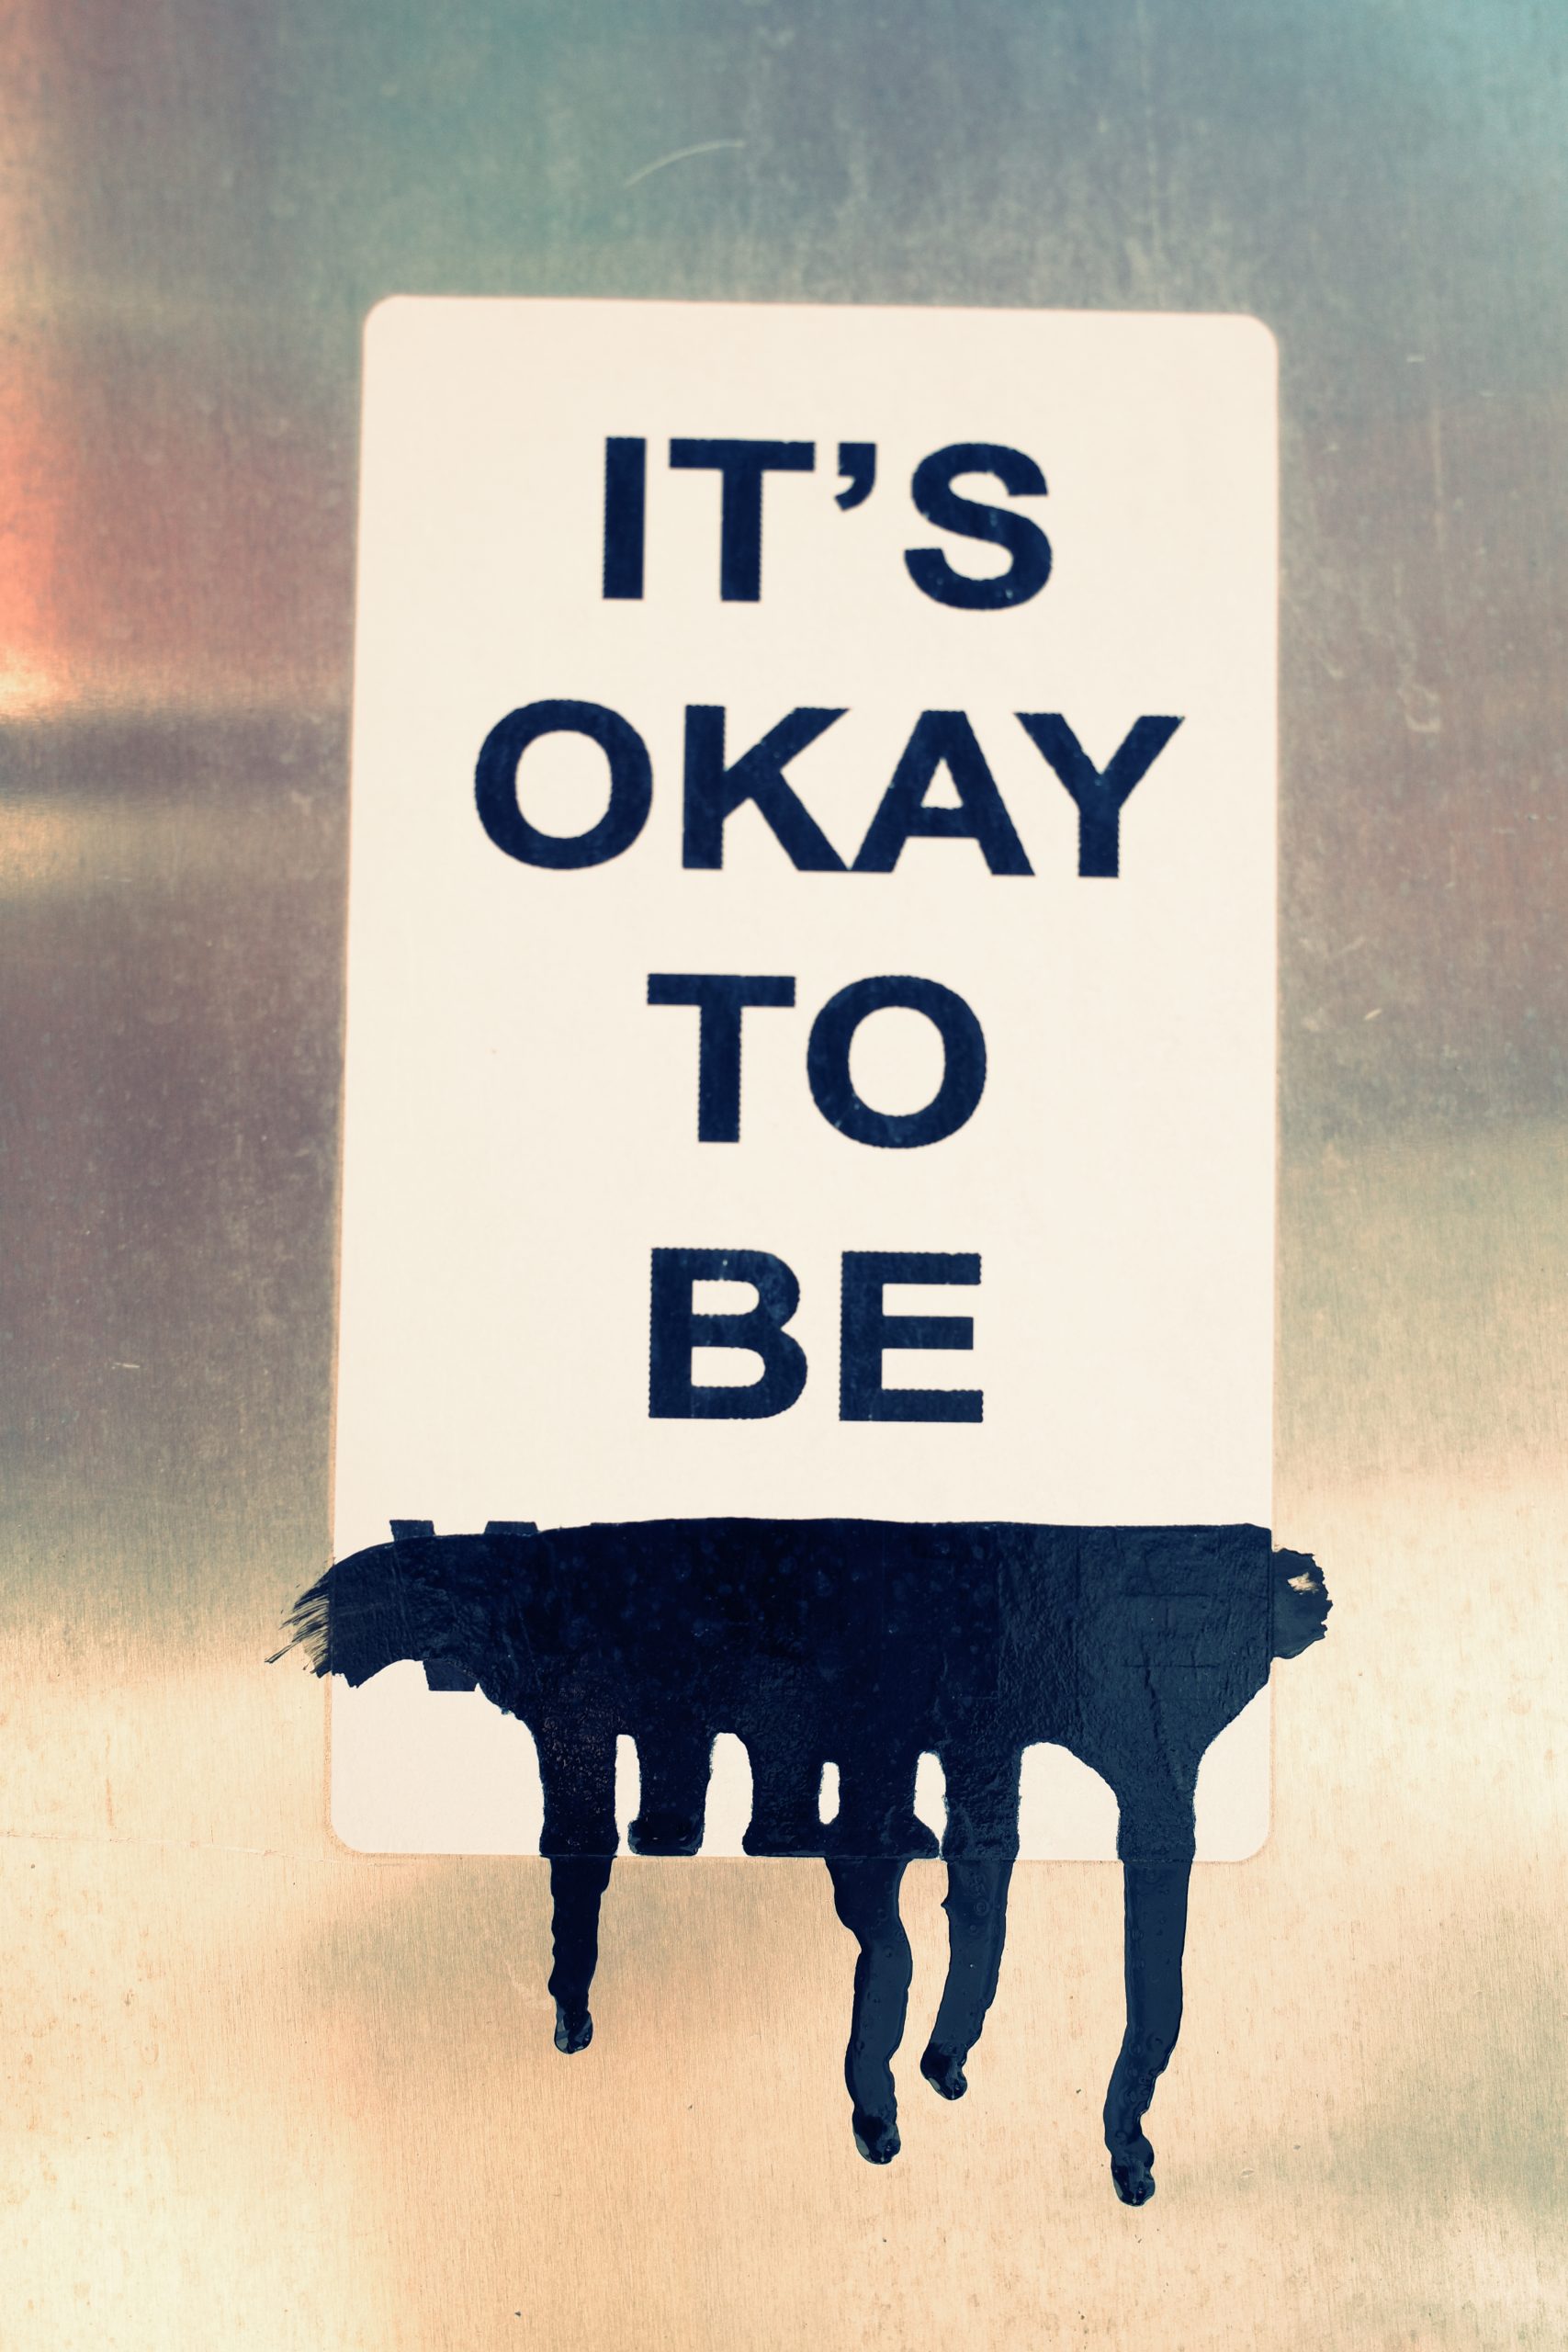 It's okay to be (fill in the blank)